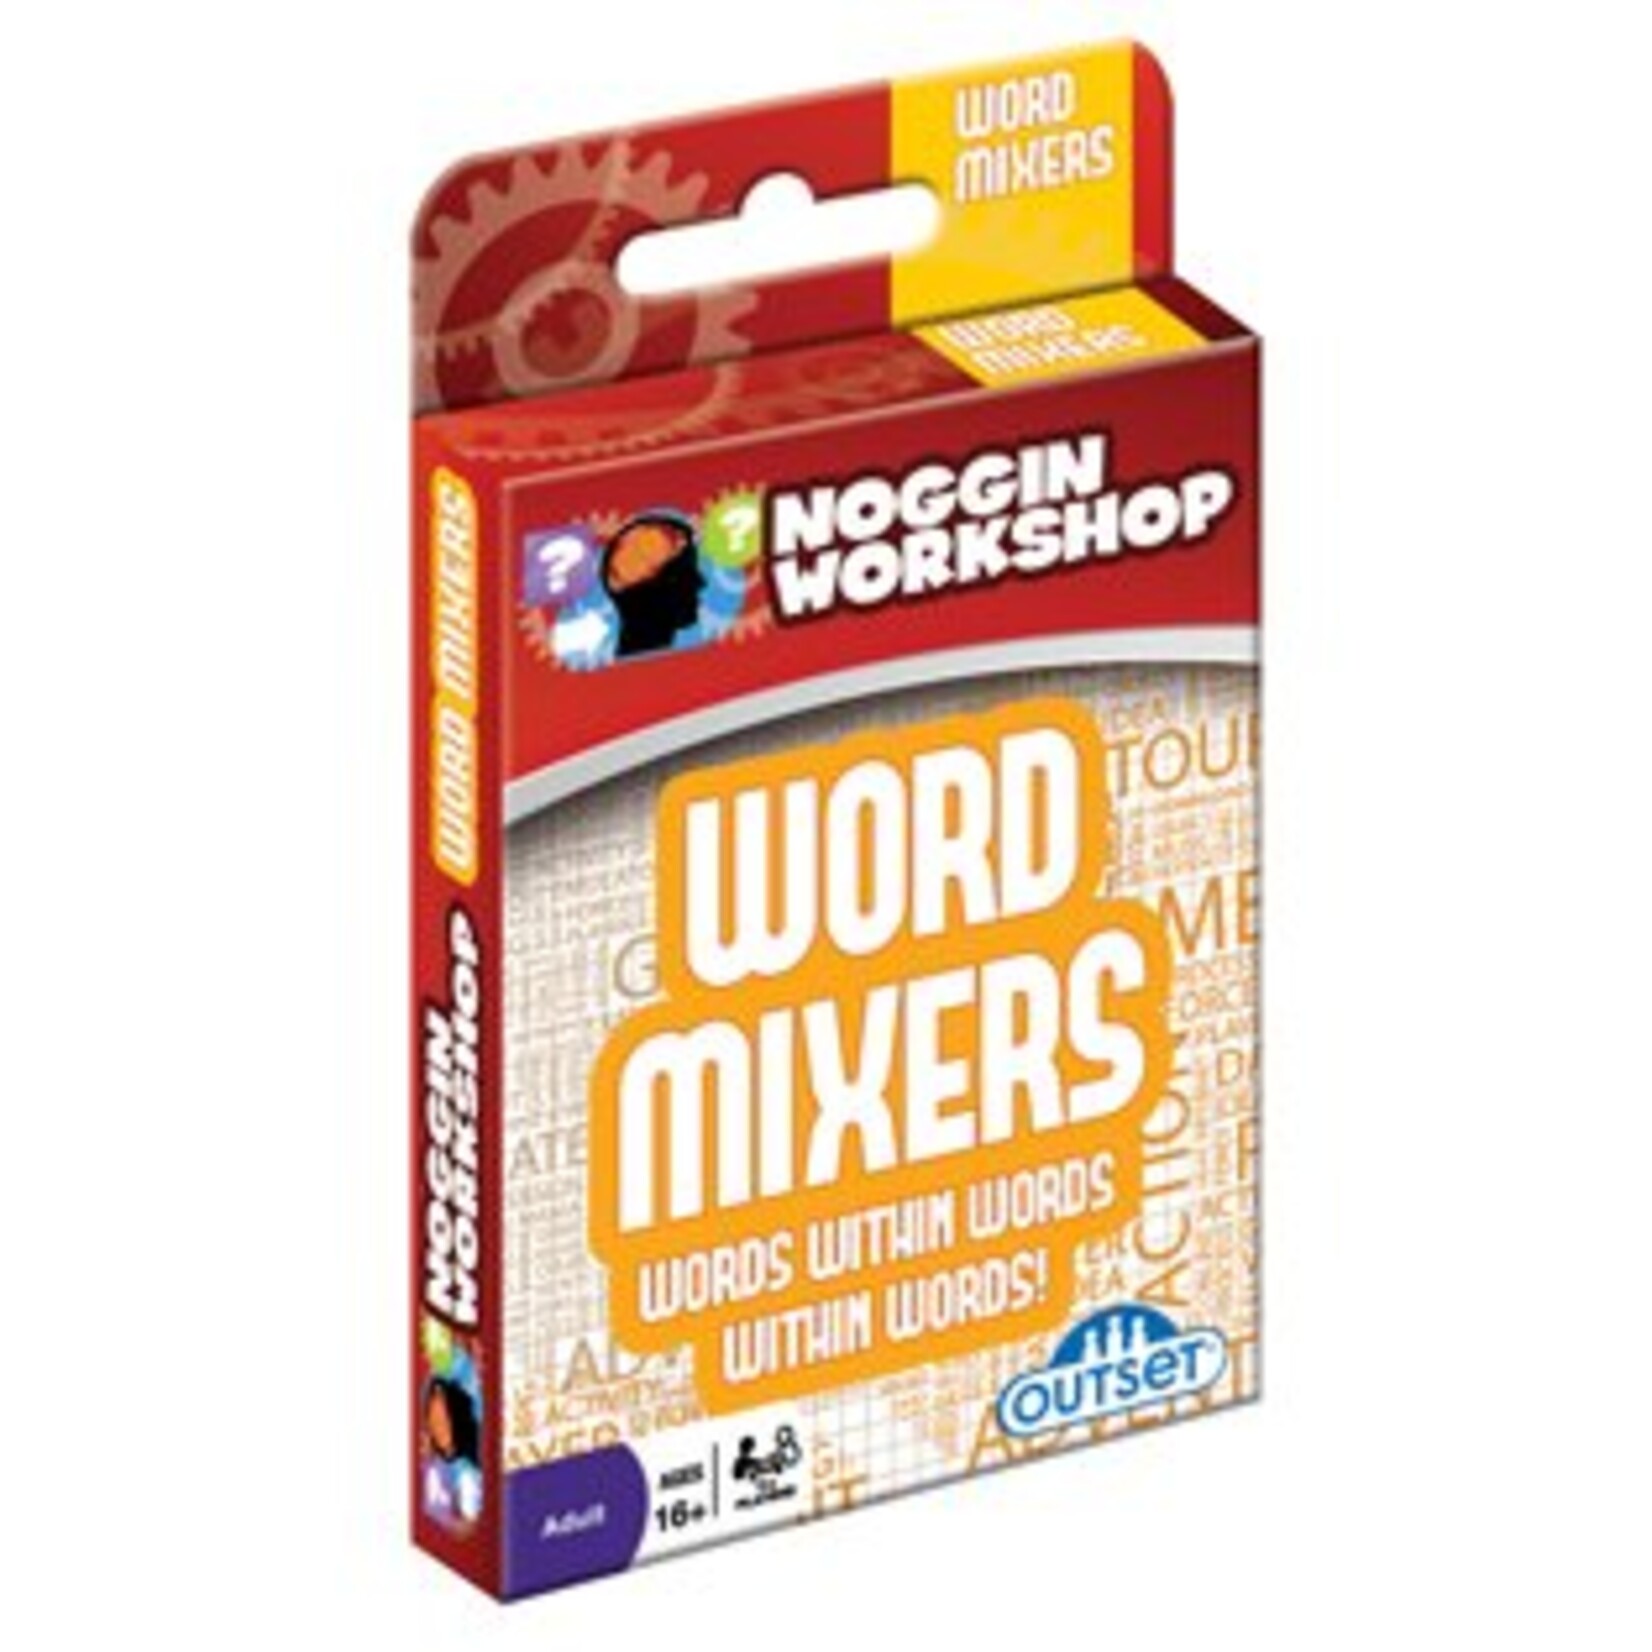 Outset Media NW: Word Mixers